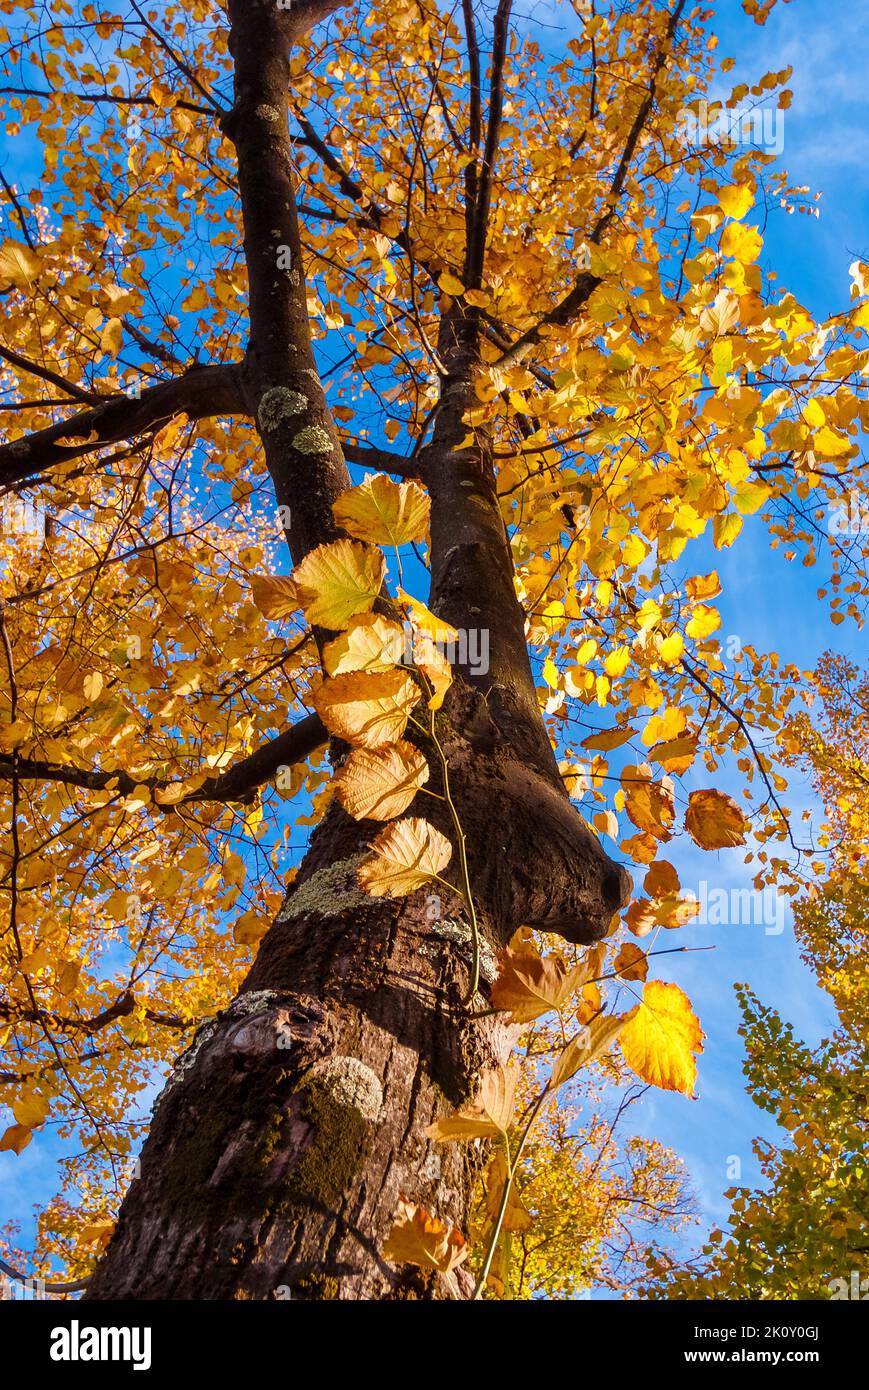 Linden or basswood tre with autumnal leaves against blue sky Stock Photo